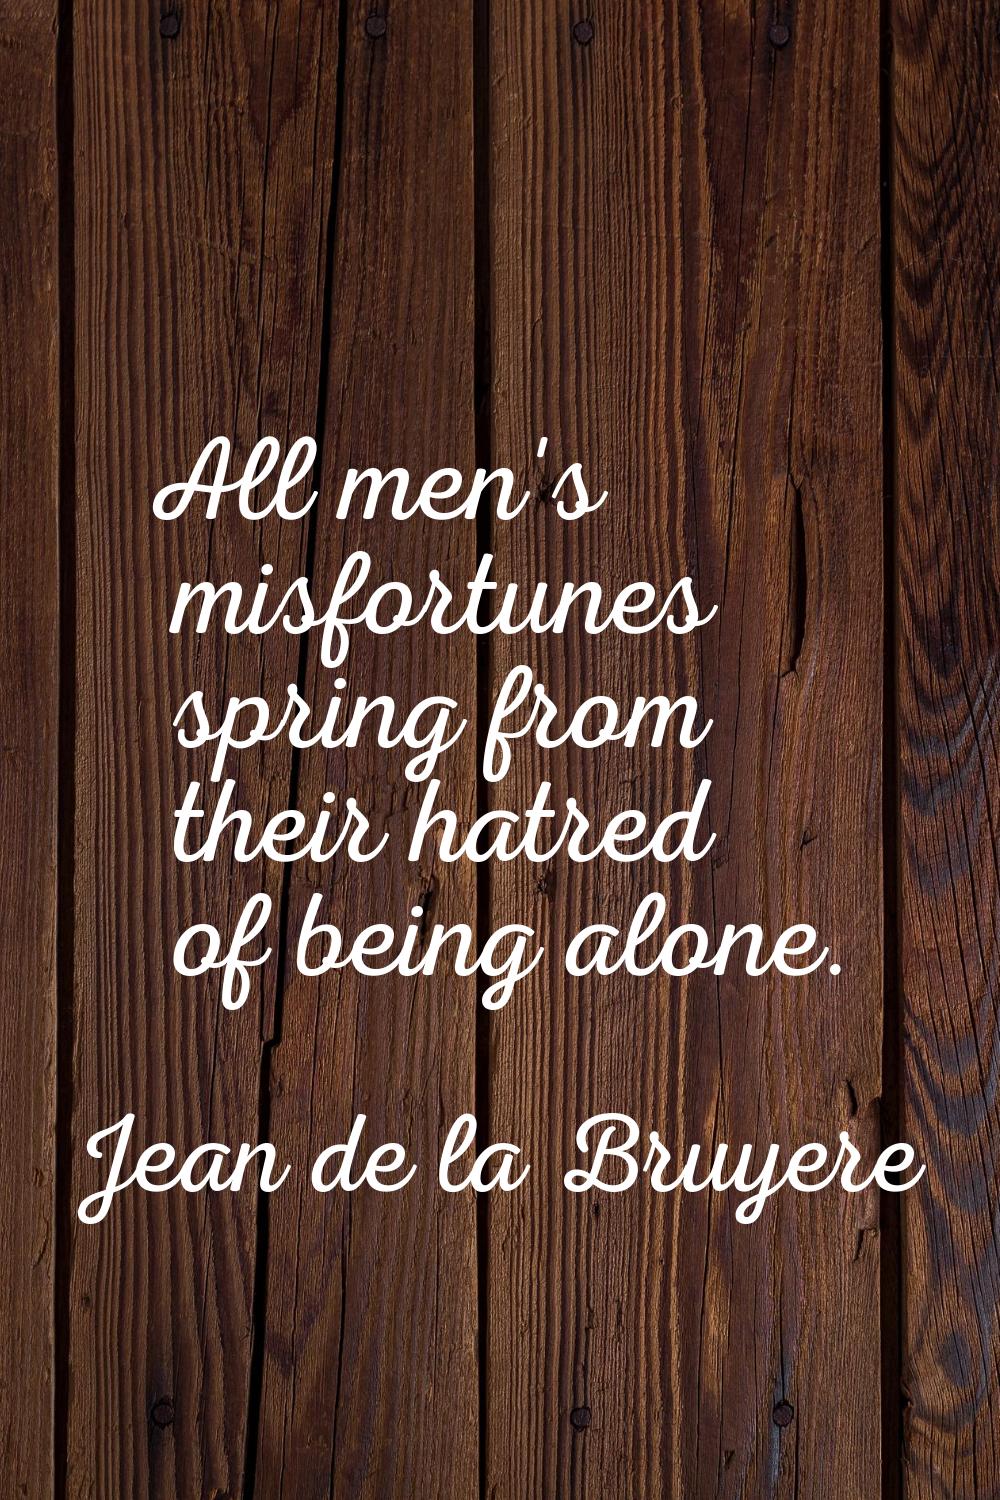 All men's misfortunes spring from their hatred of being alone.